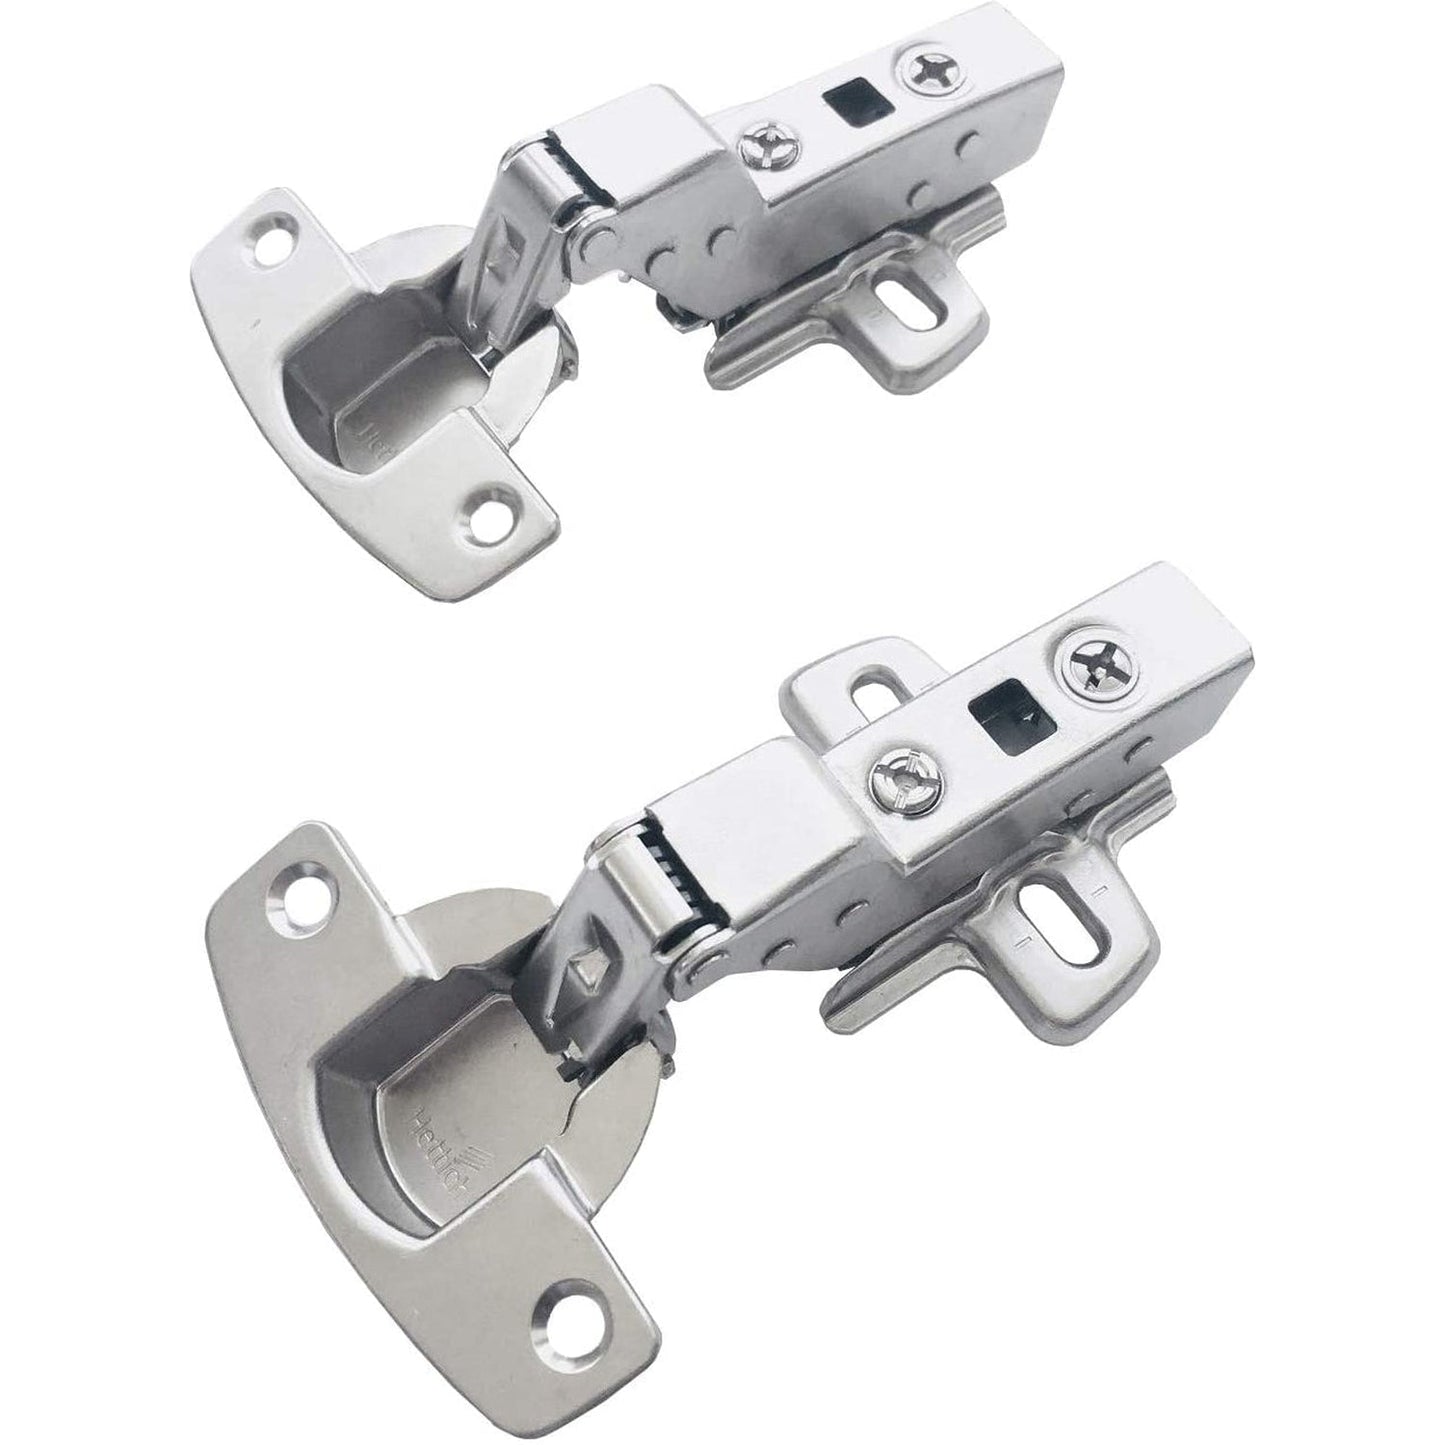 Hettich Sensys 8645i 110° Inset Soft Close Hinge & Mounting Plate TH52 (2 Pack)